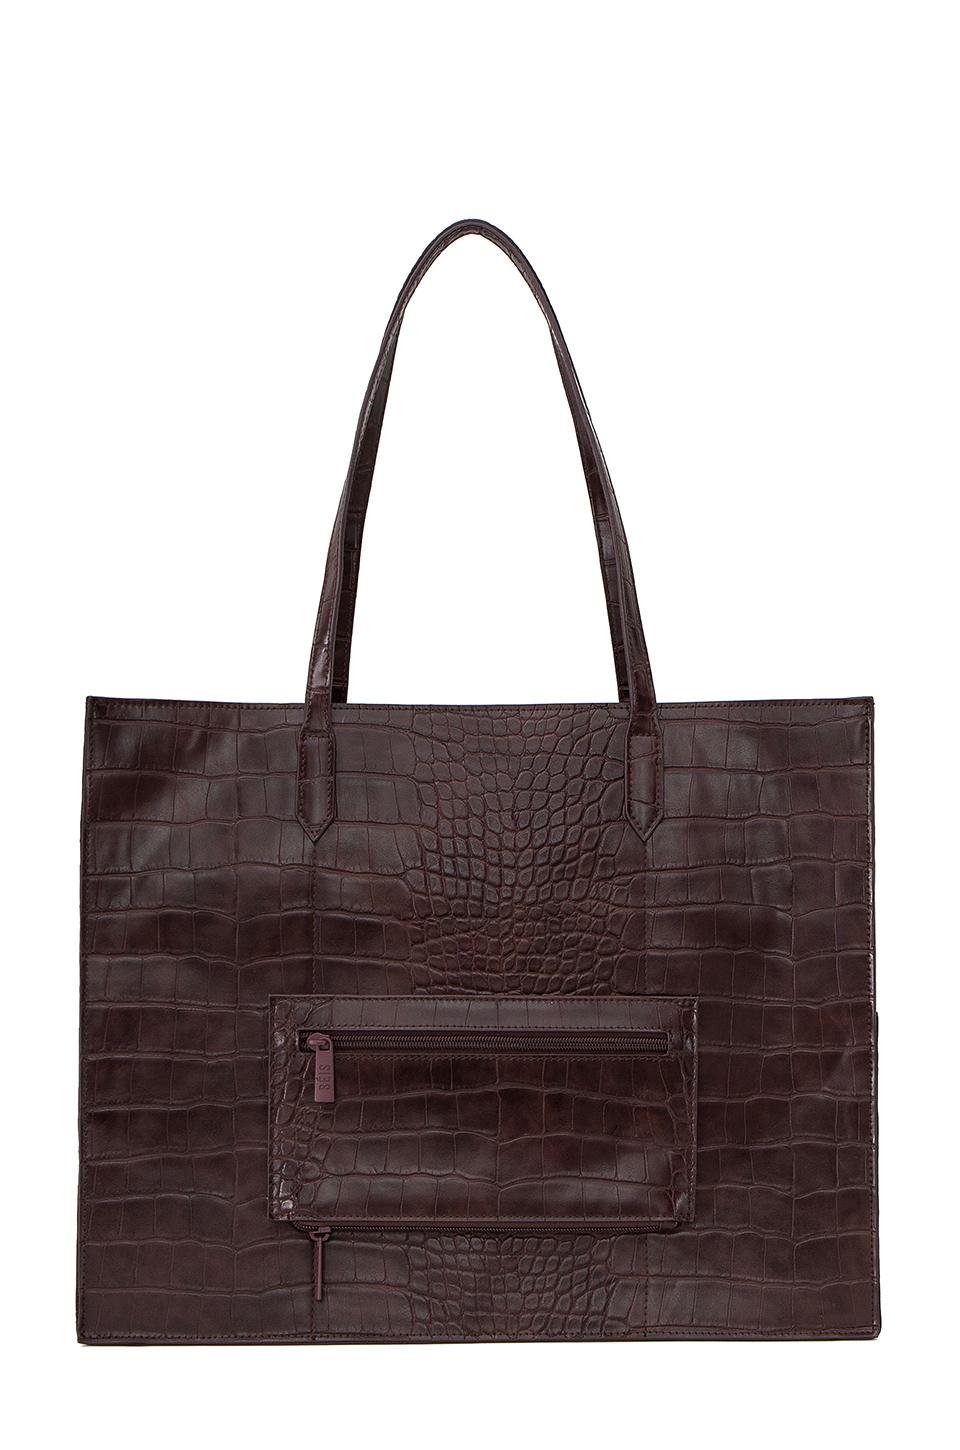 BEIS Work Tote in Espresso (Brown) | Lyst